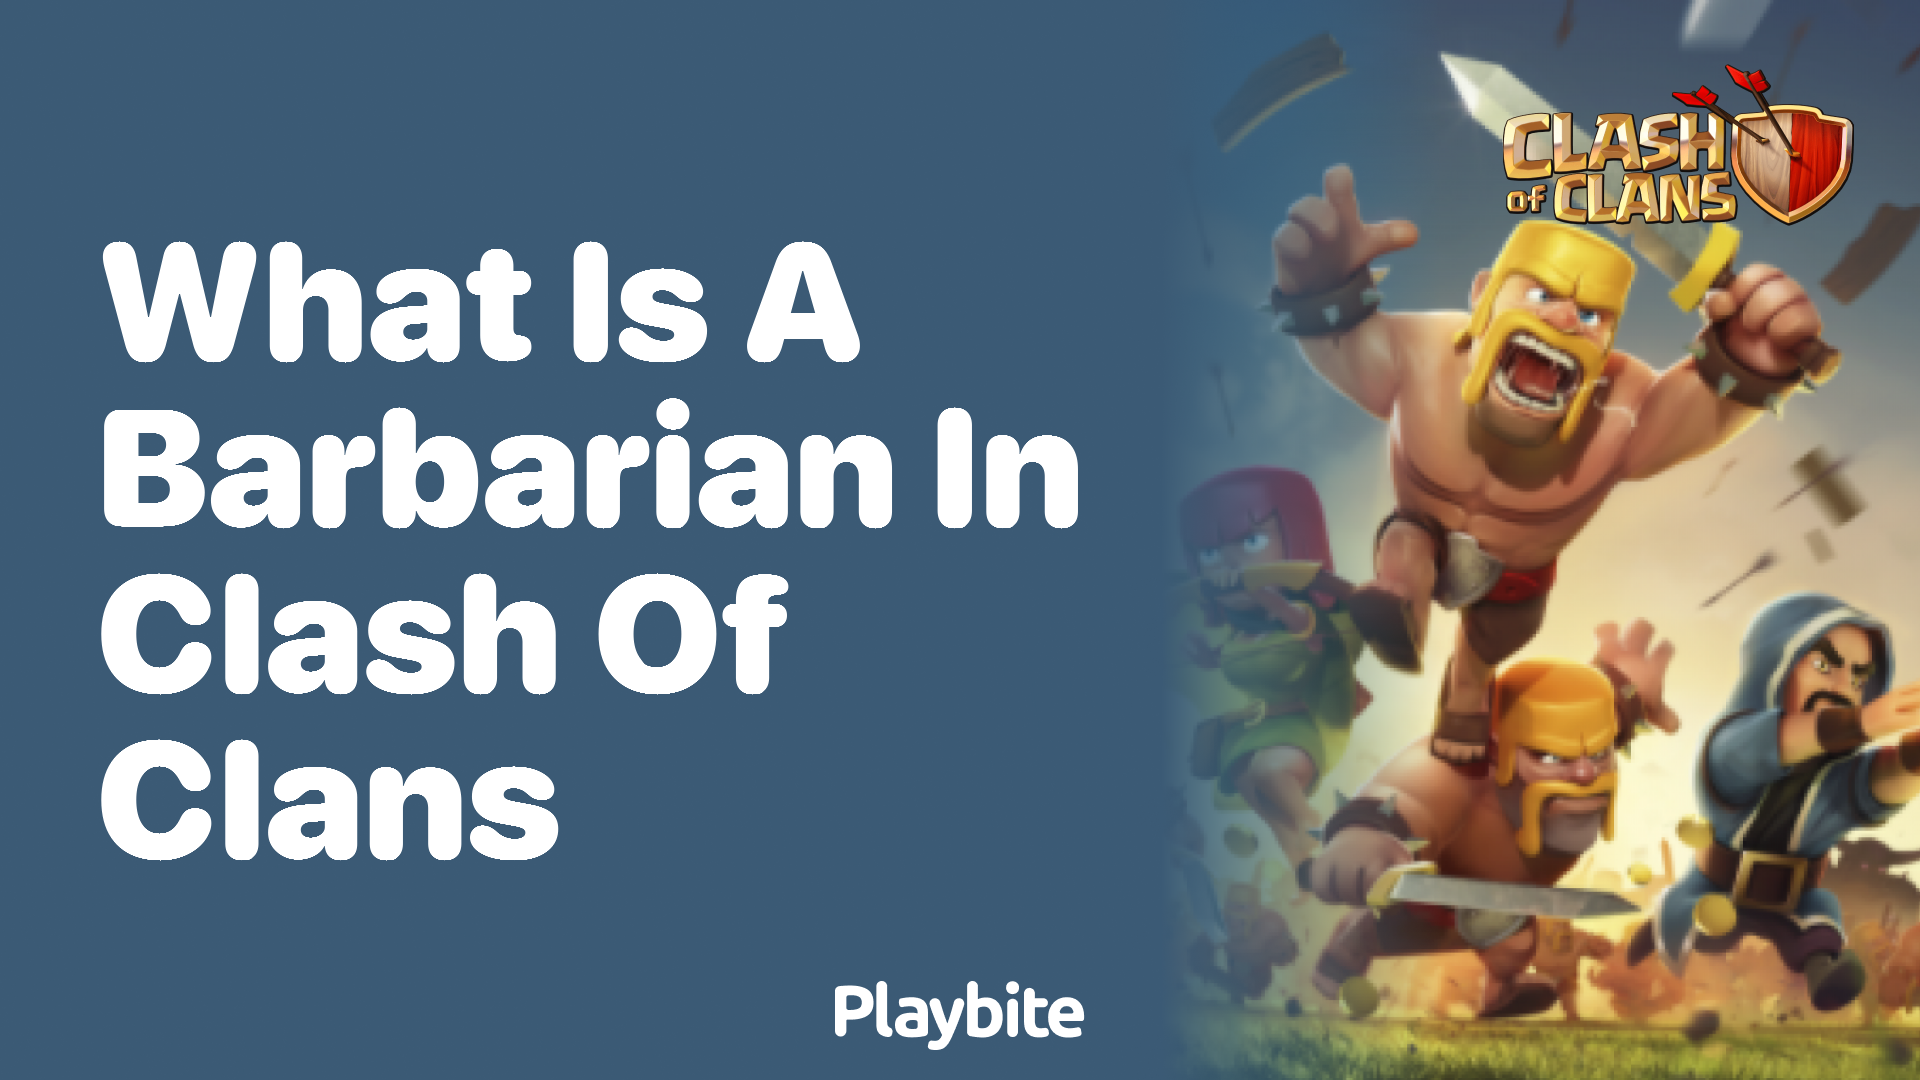 What is a Barbarian in Clash of Clans?